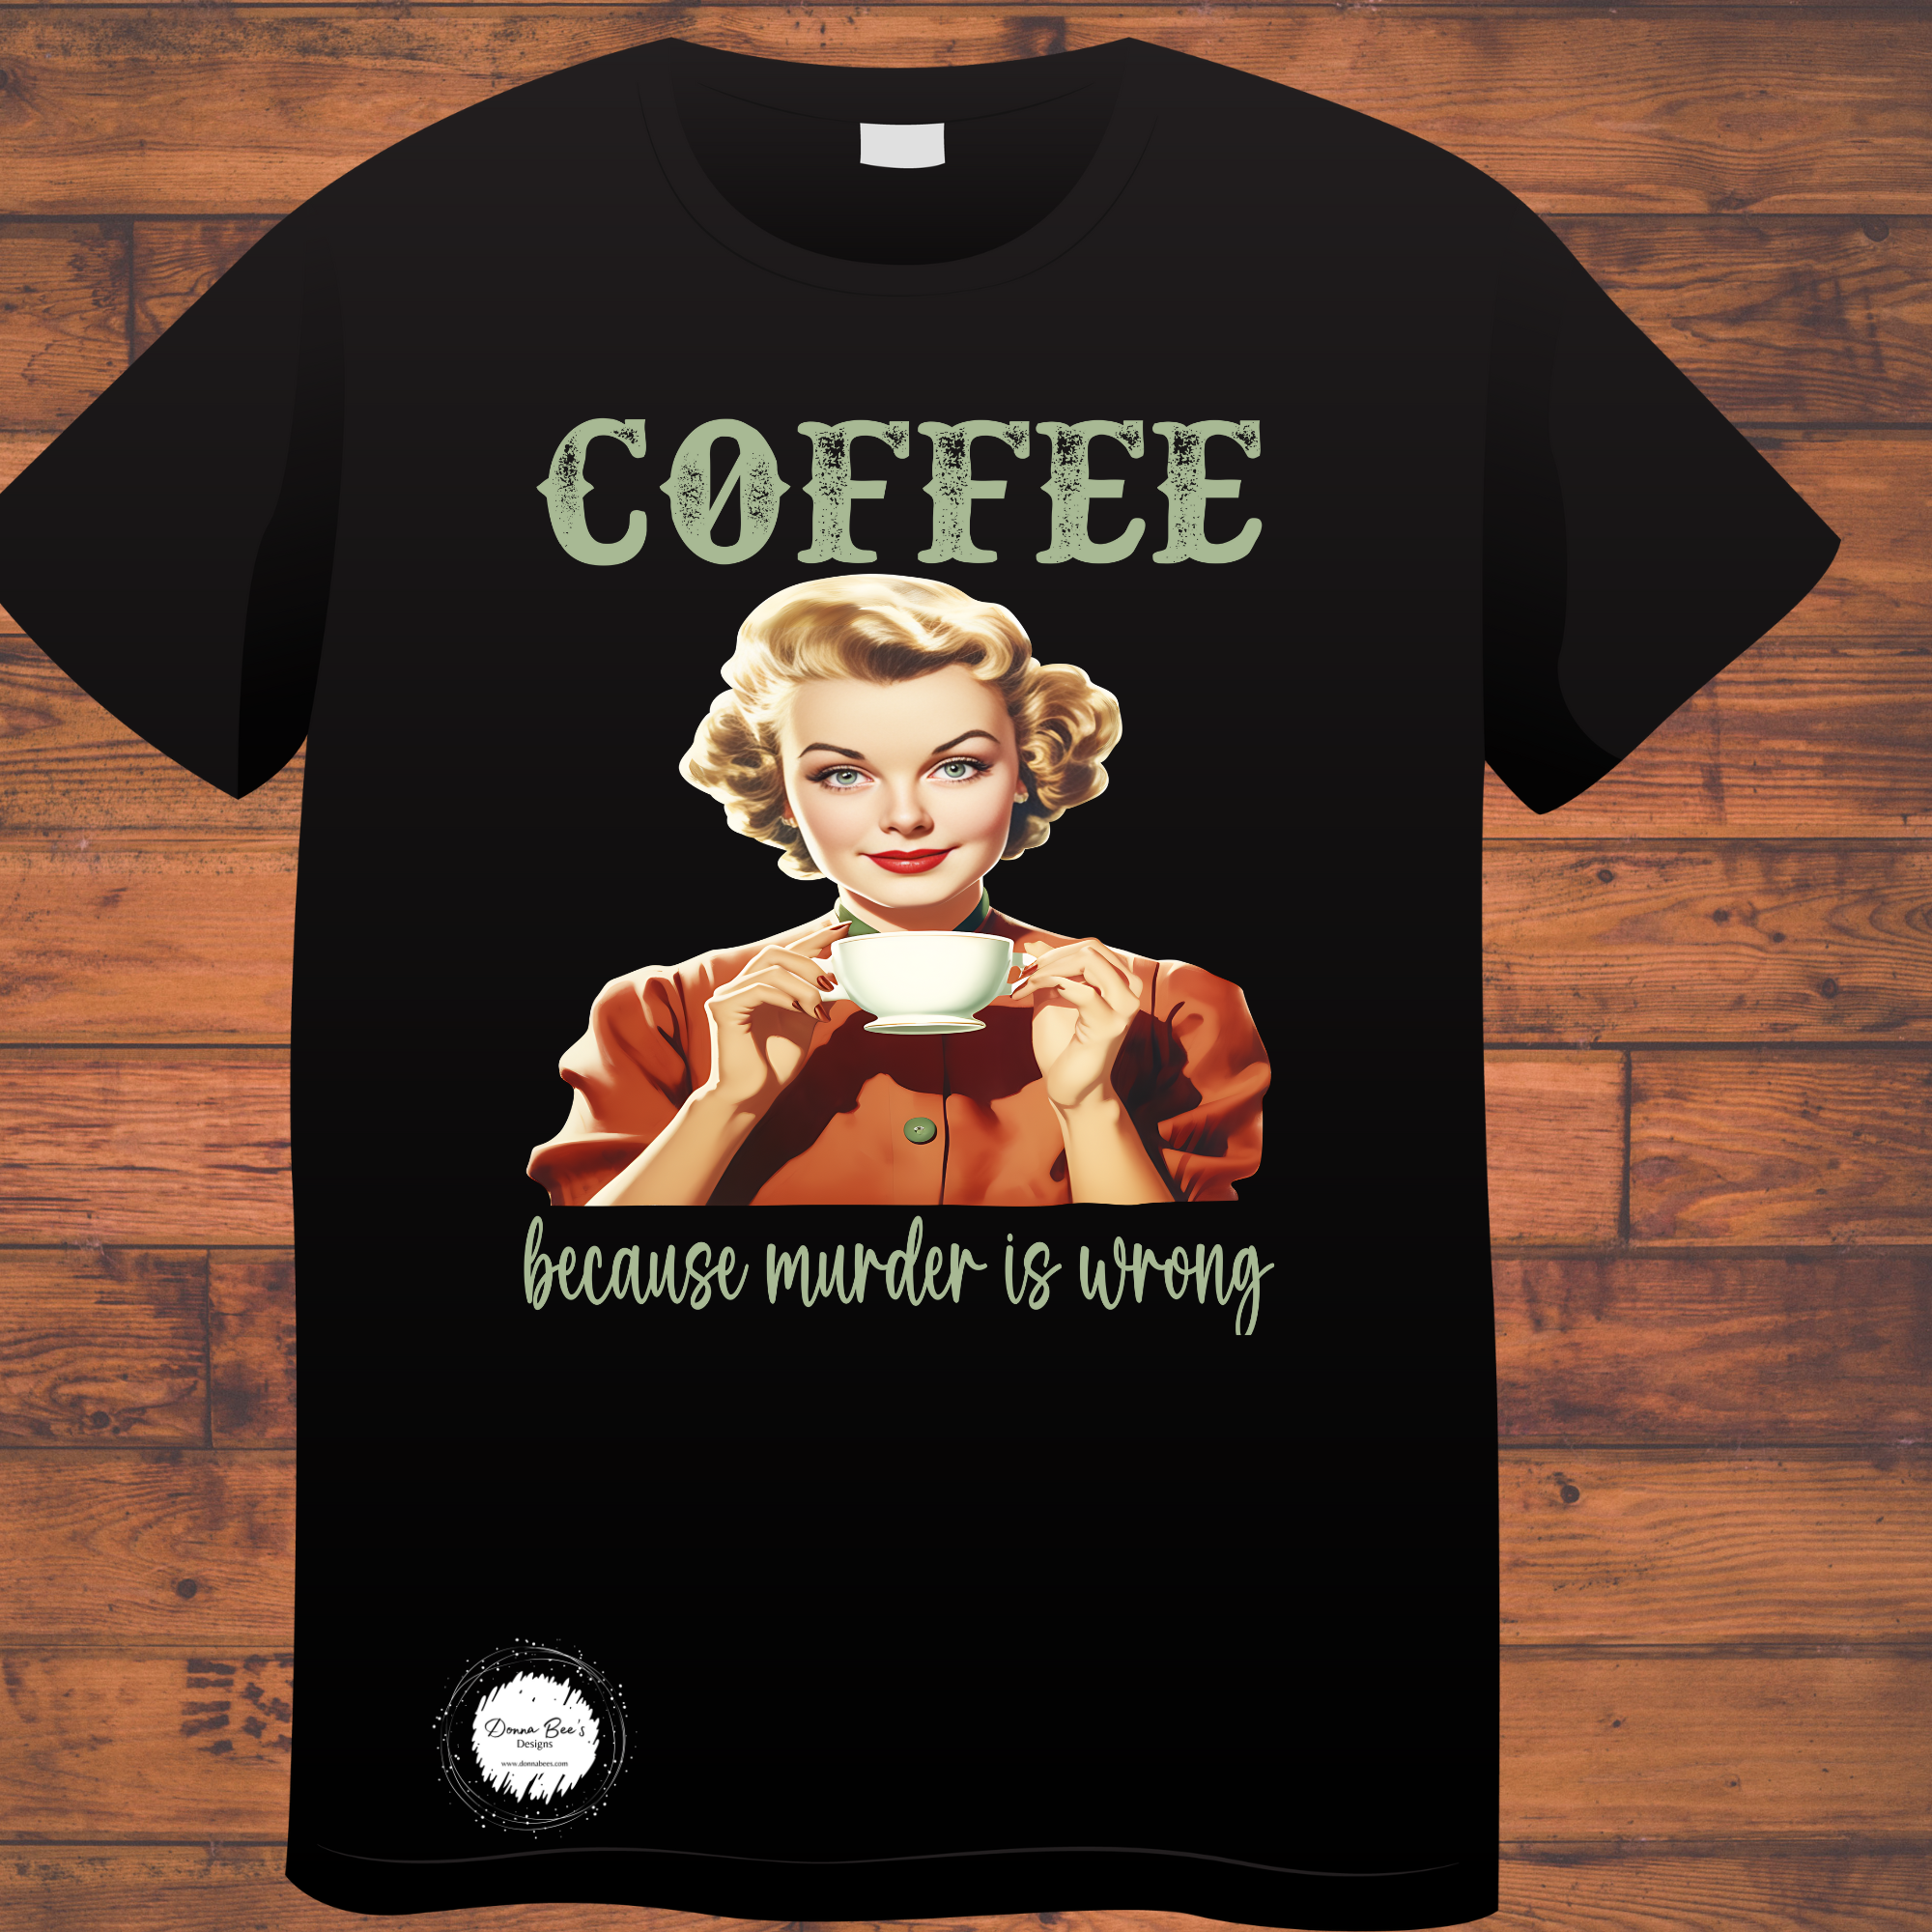 Coffee because murder is wrong | Funny tee